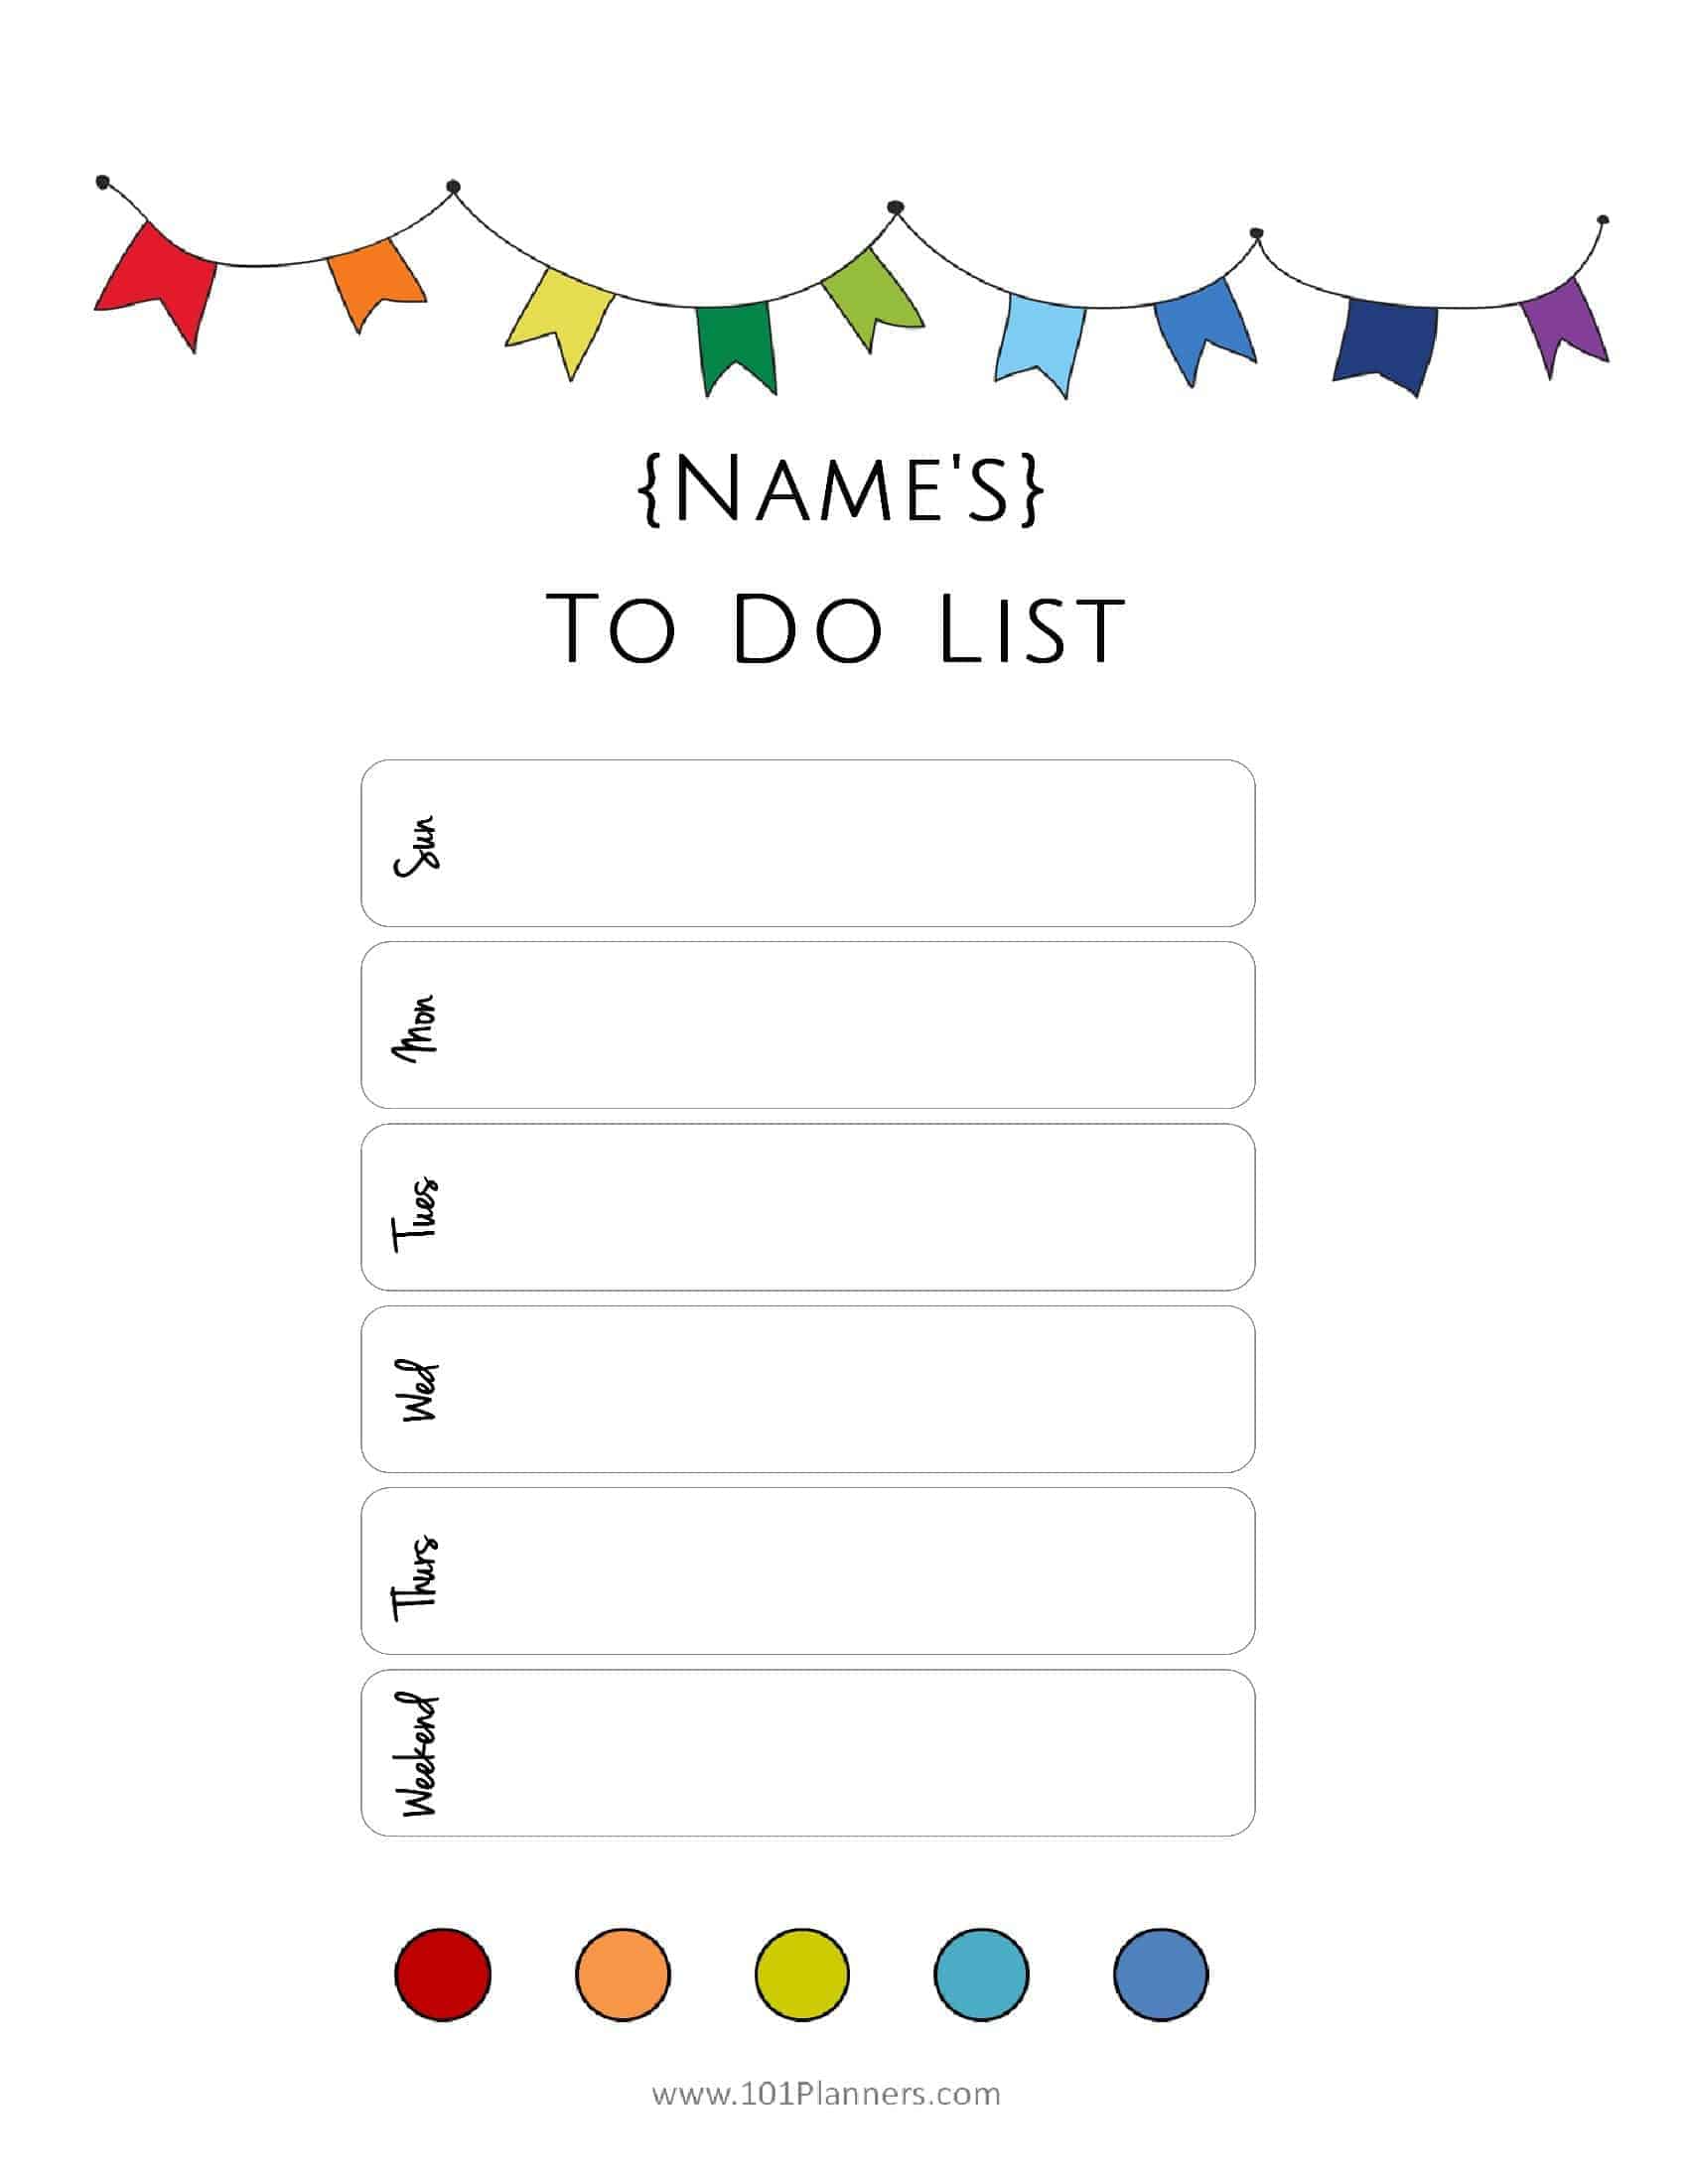 FREE Printable To Do List Print or Use Online Access from Anywhere